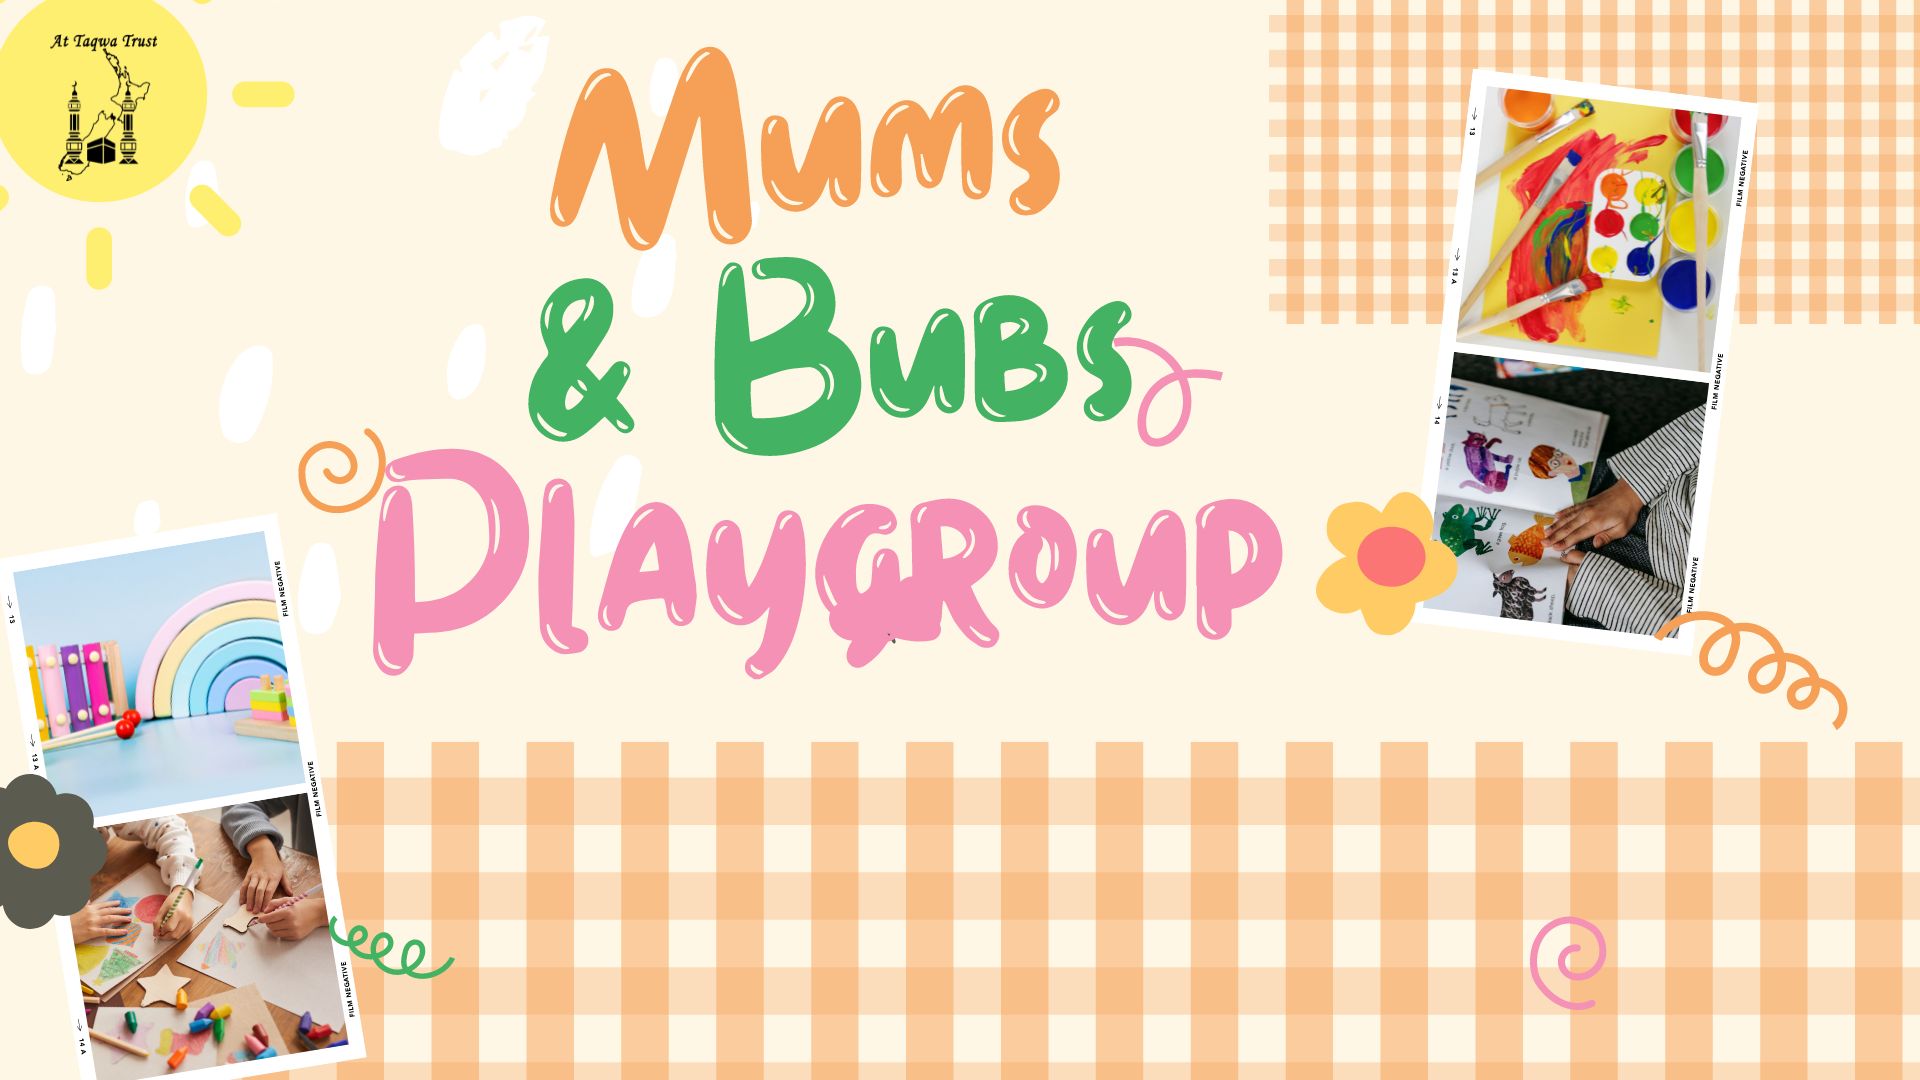 Mums and bubs playgroup